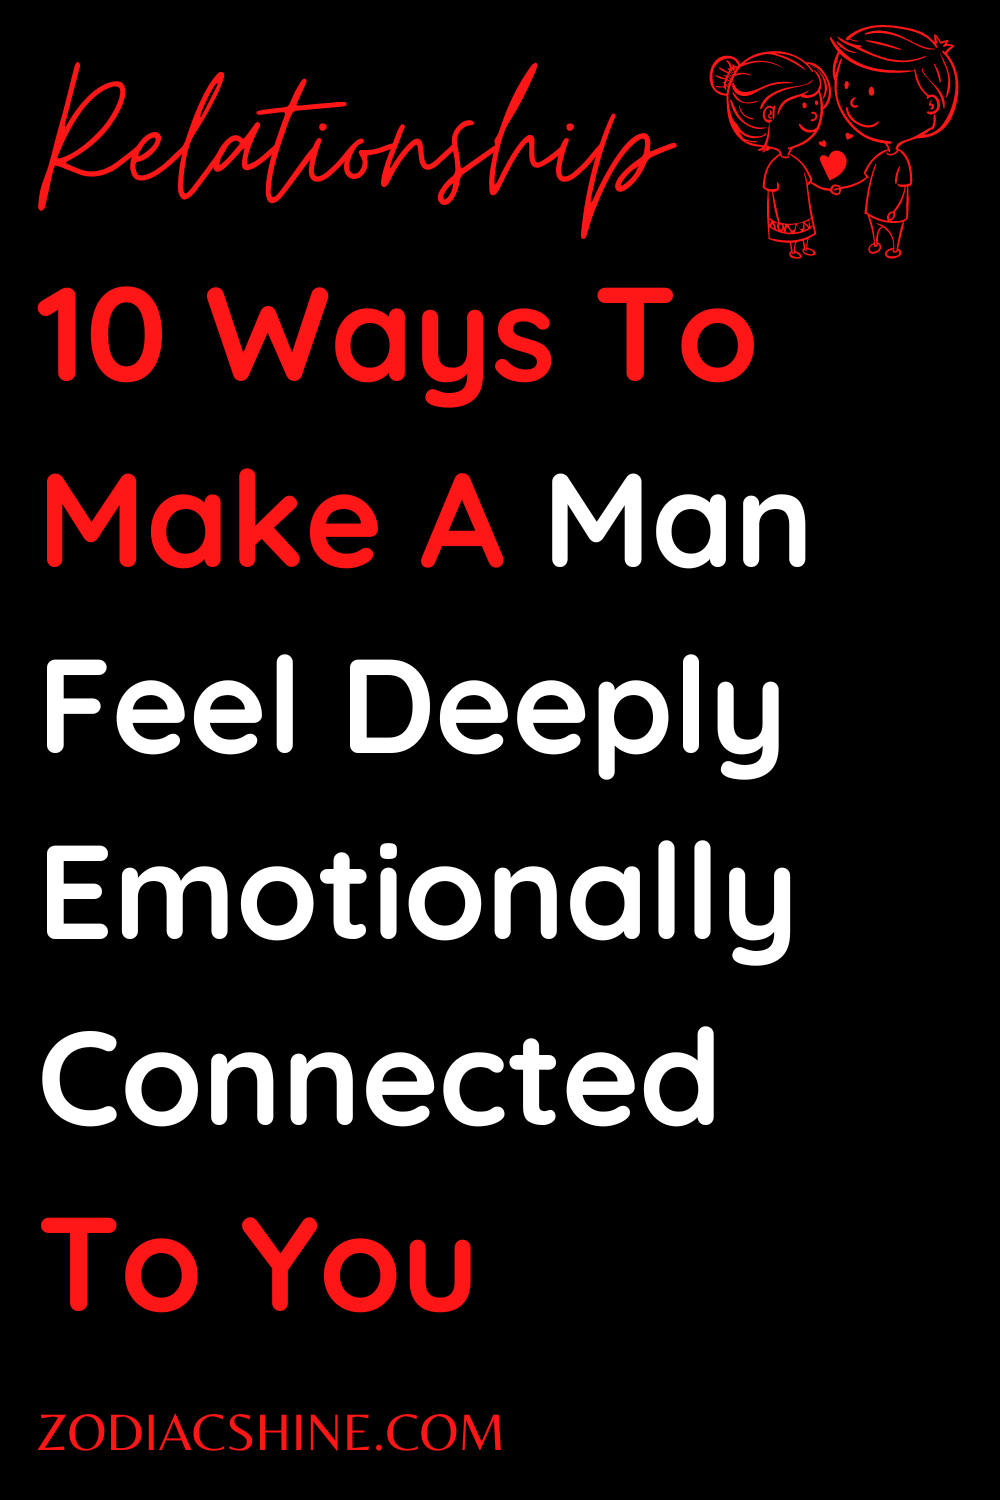 10 Ways To Make A Man Feel Deeply Emotionally Connected To You